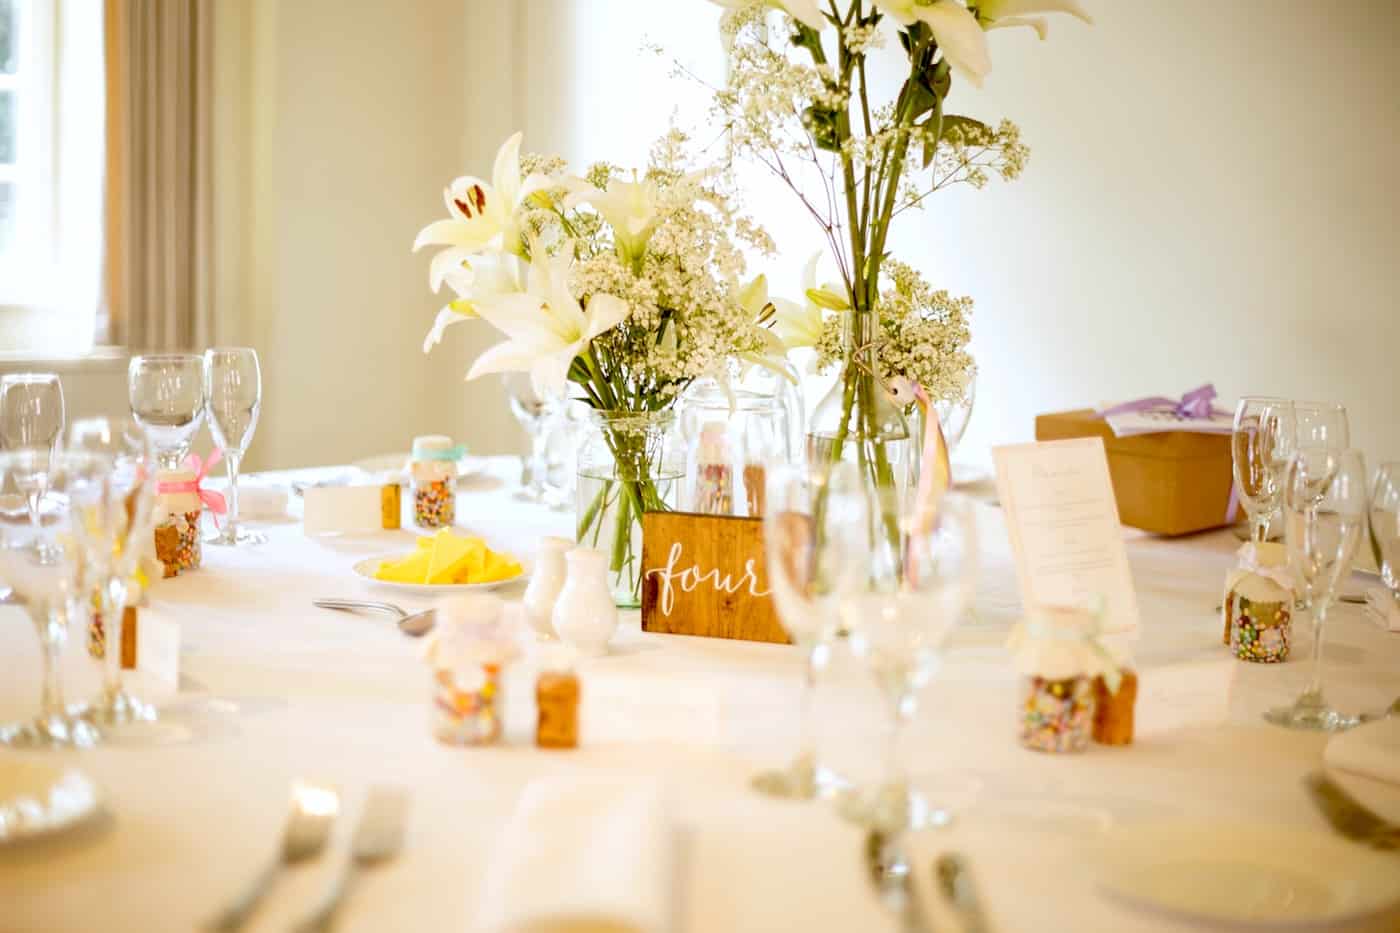 5 Decorating Tips for Hosting a Memorable Event